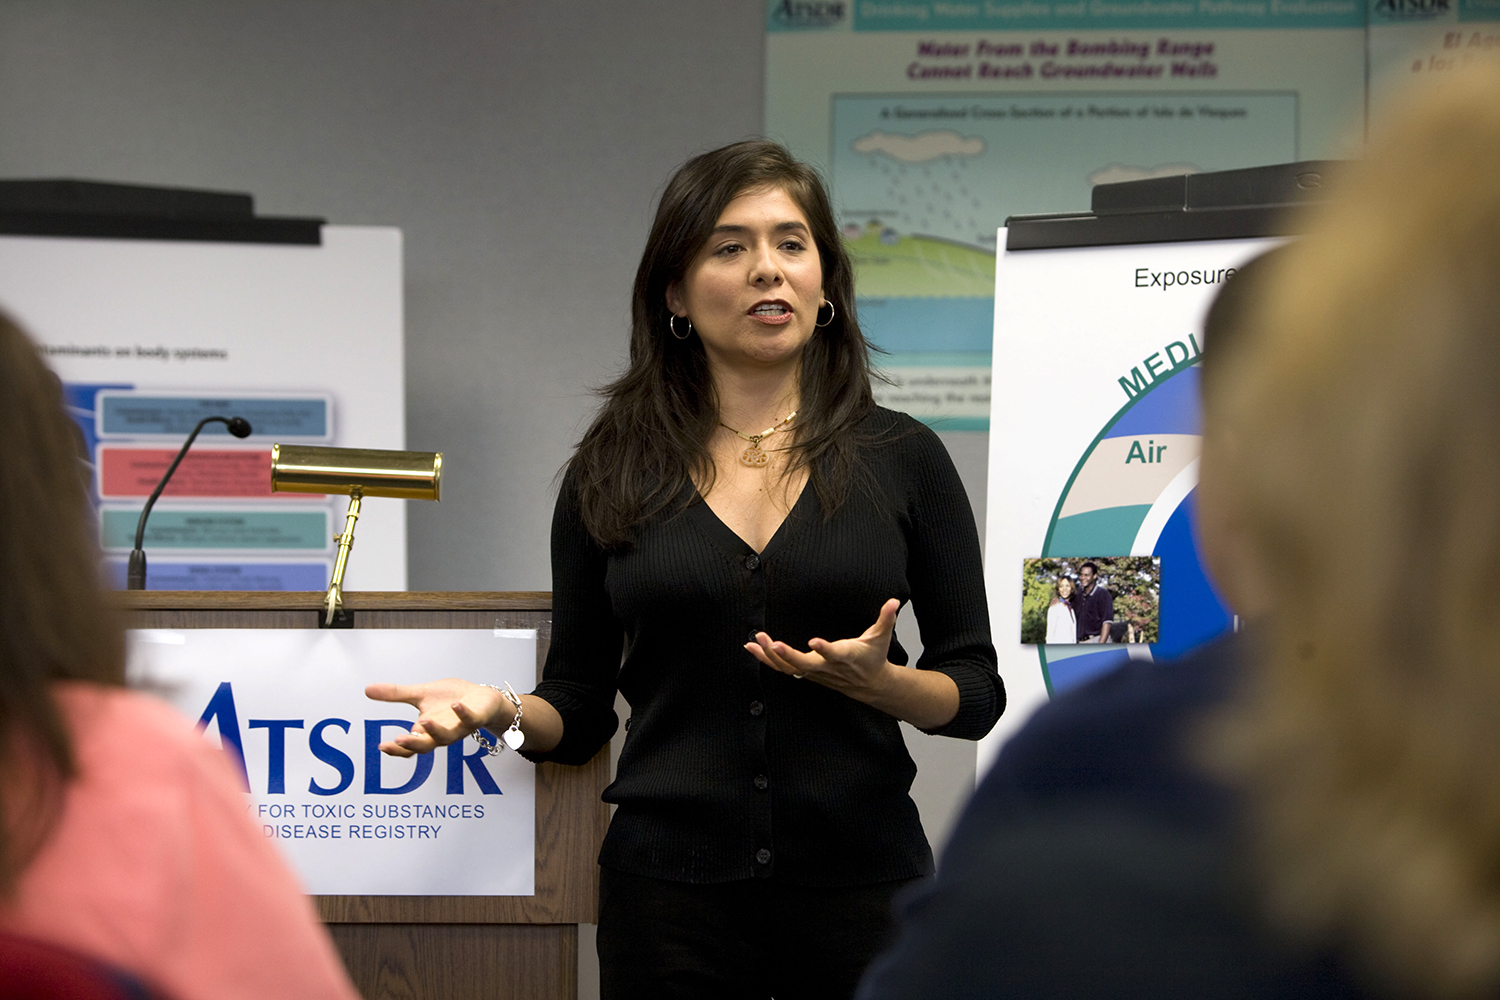 A Hispanic woman speaks to attendees at a town hall meeting in front of a podium with an ATSDR sign displayed.